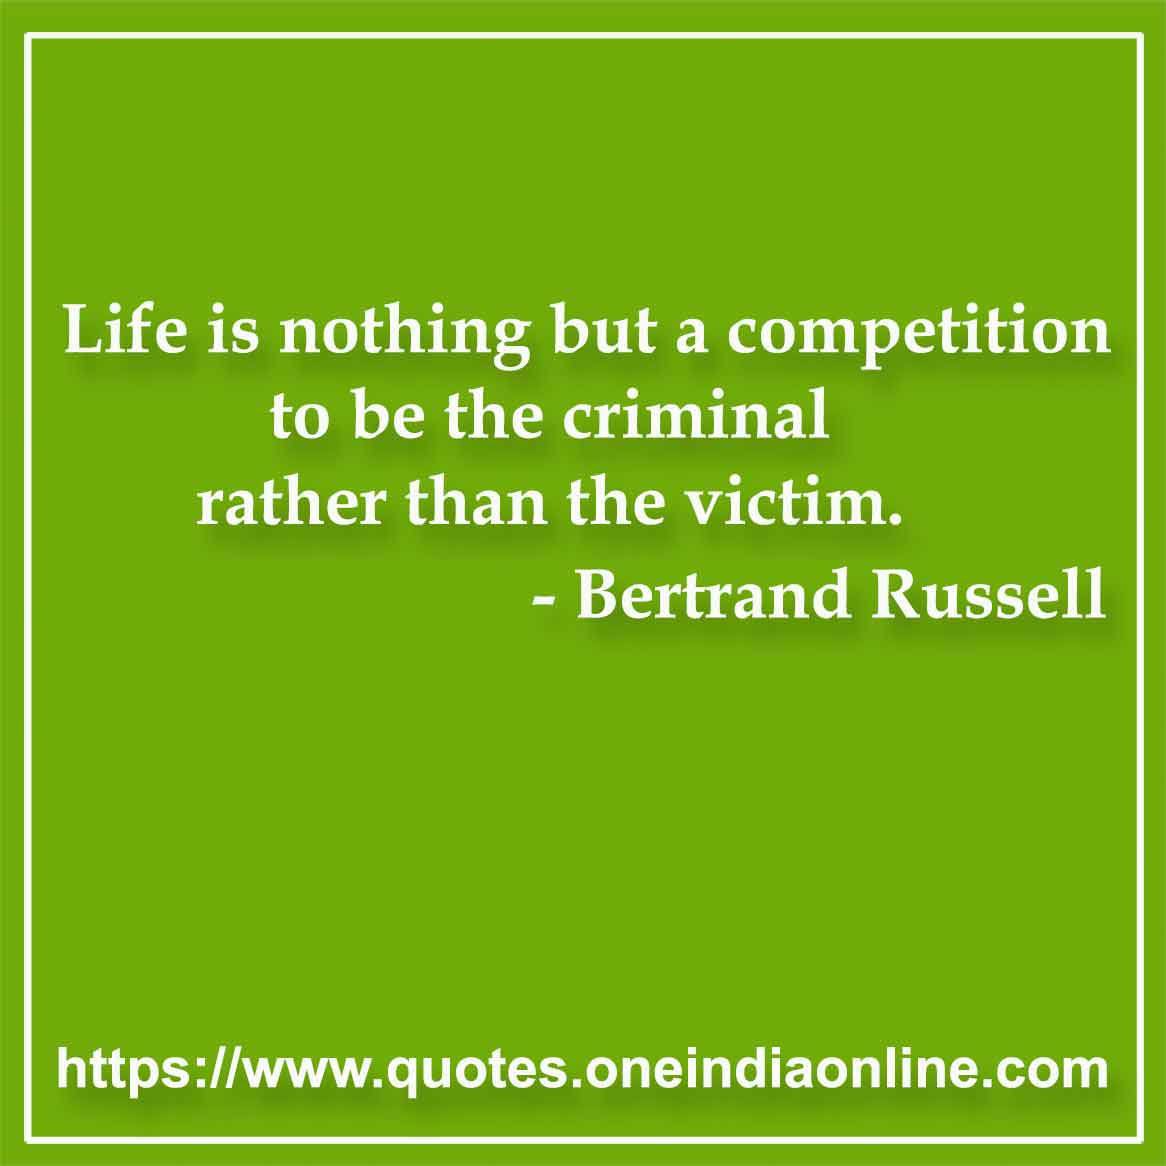 Life is nothing but a competition to be the criminal rather than the victim.

- Crime Quotes by Bertrand Russell